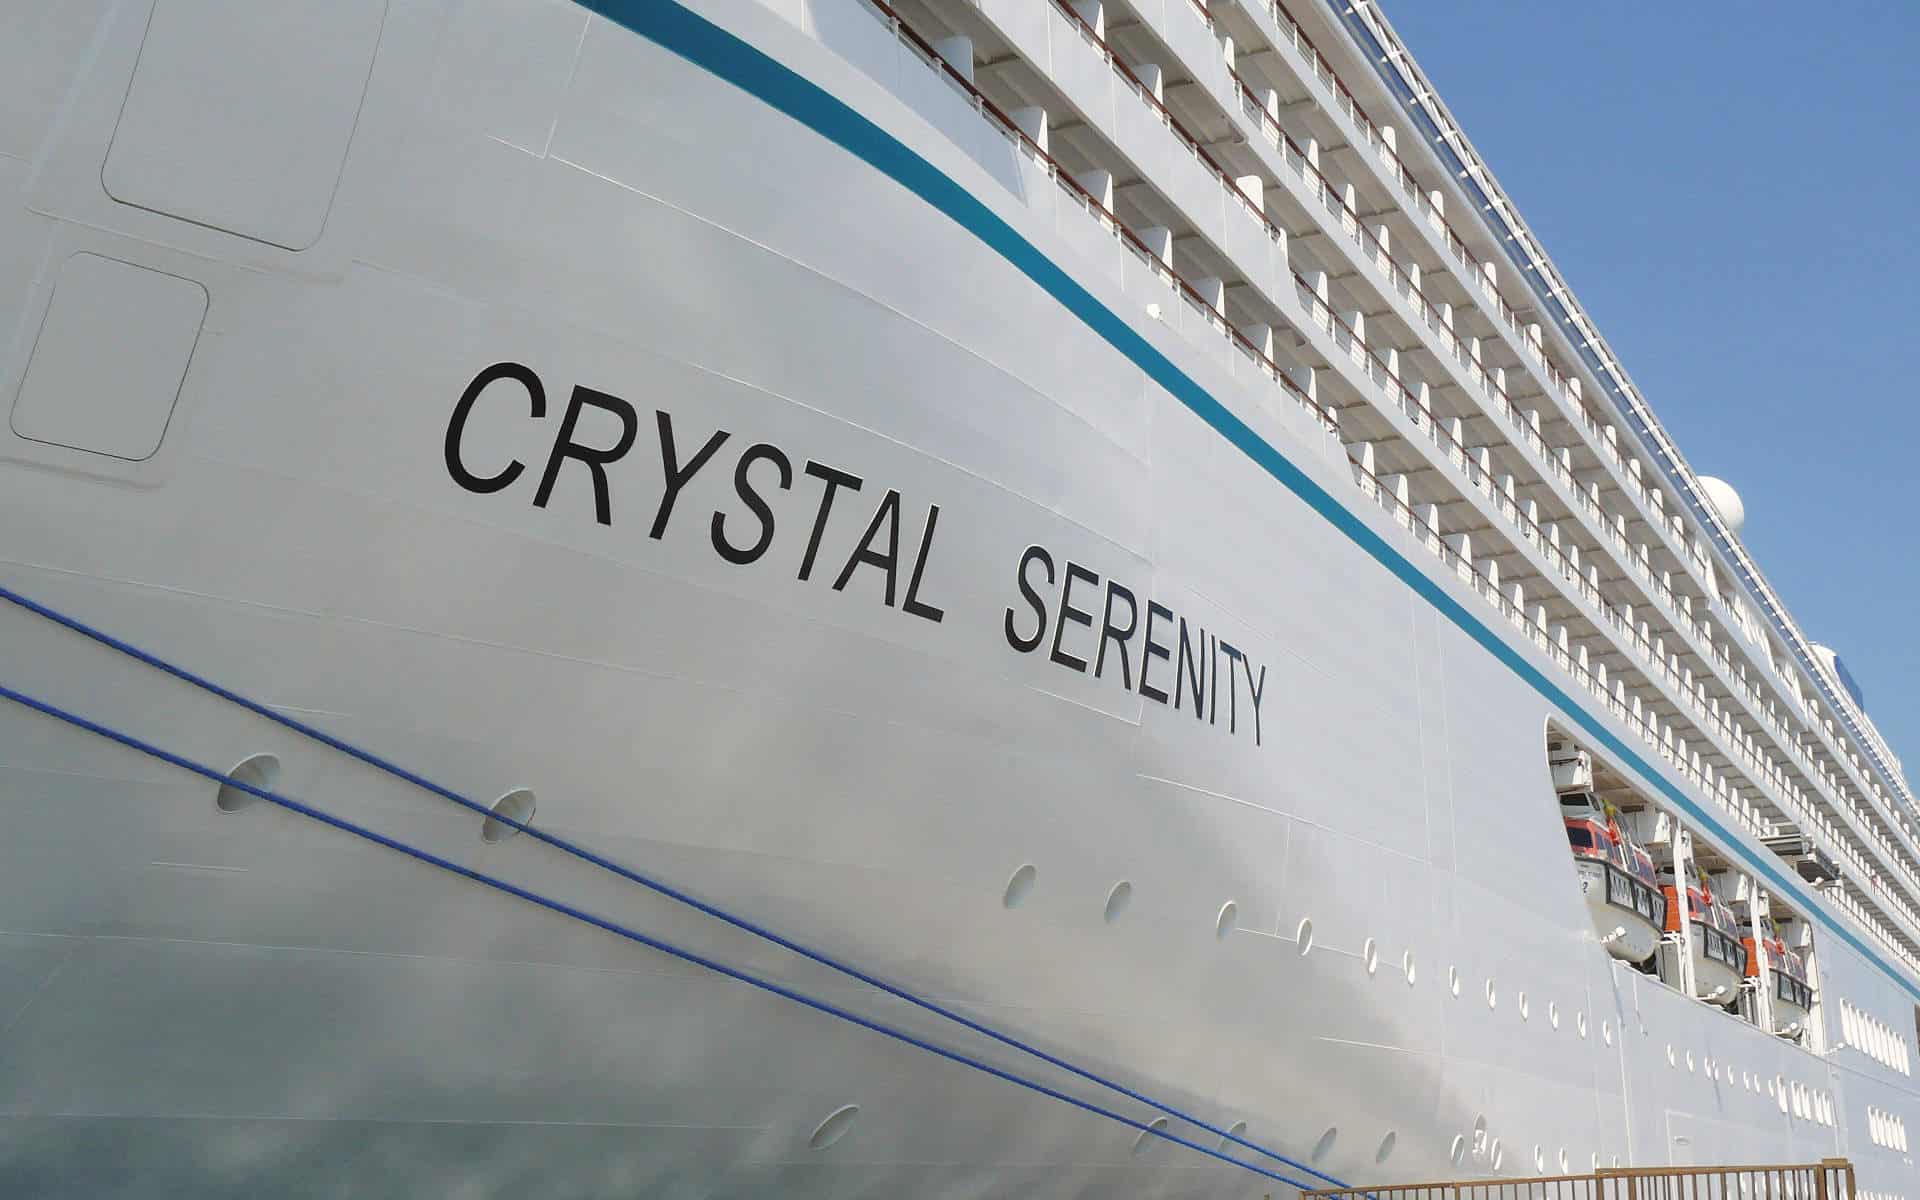 Crystal Serenity will have its operations suspended.